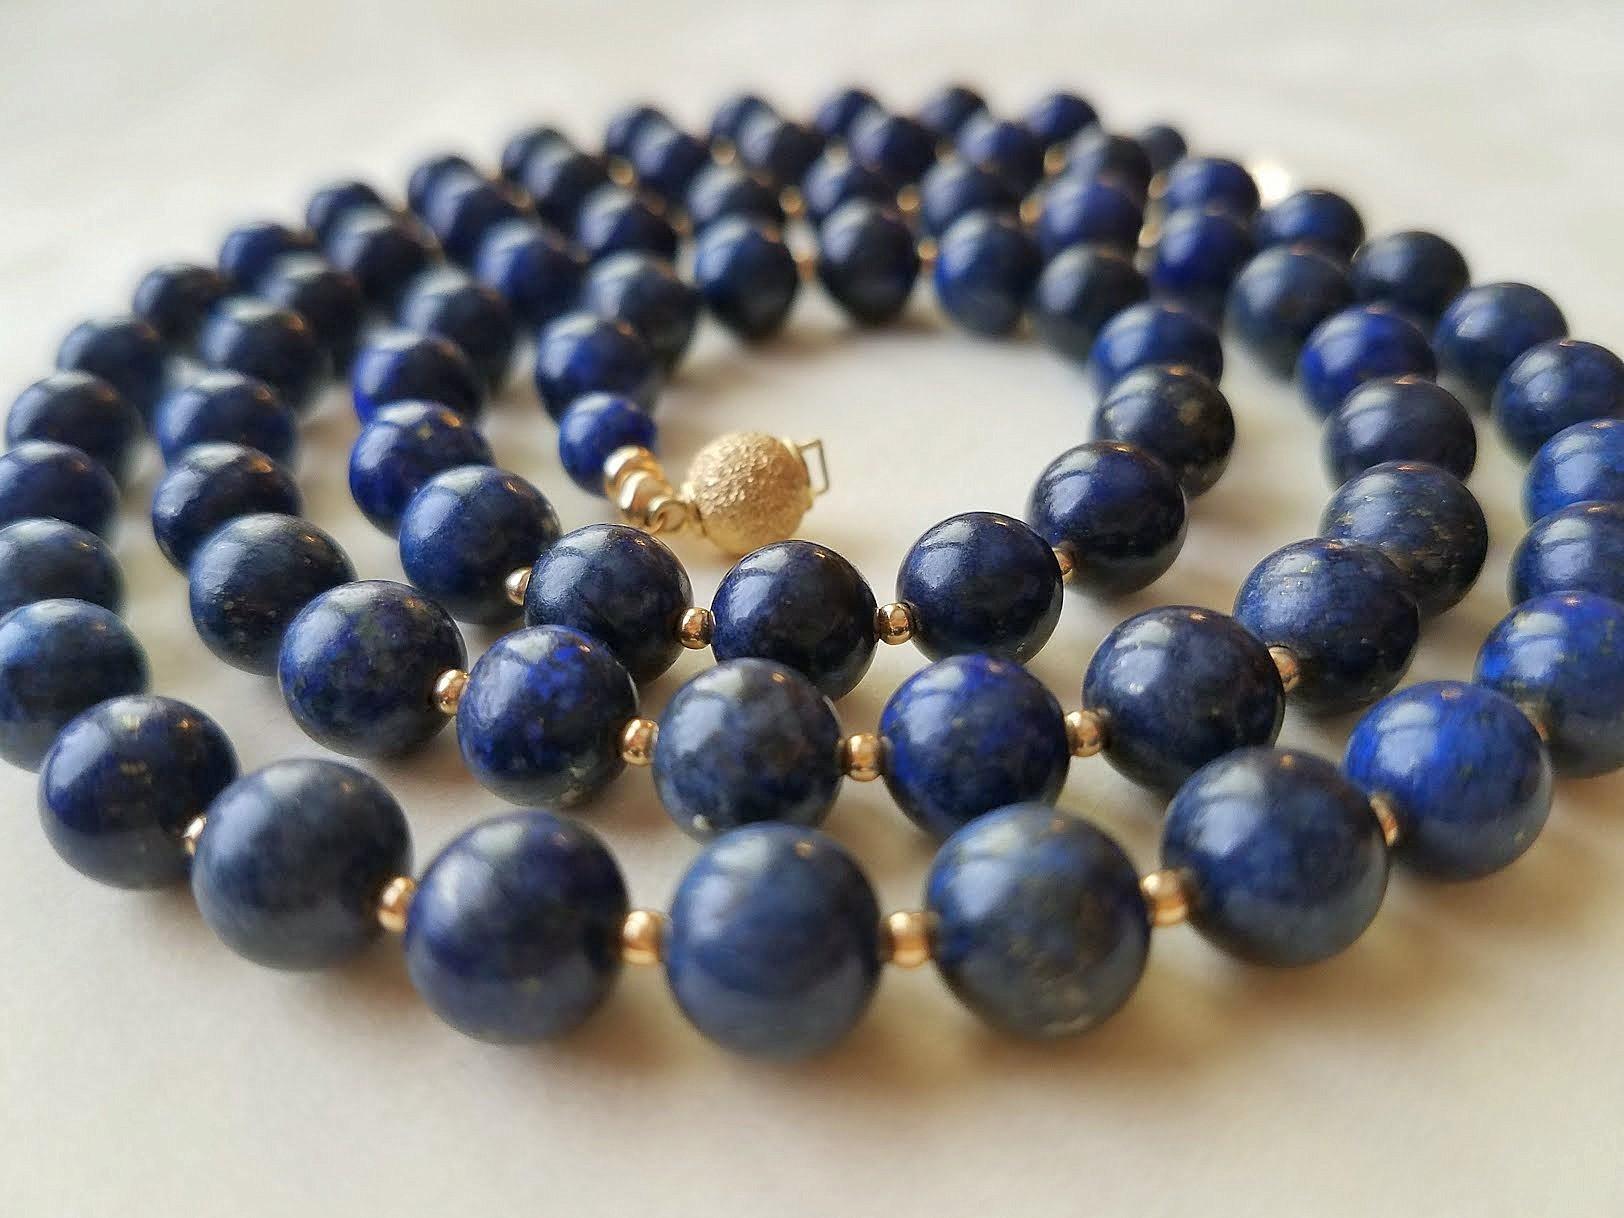 The length of the necklace is 29 inches (73.6 cm). The size of the beads is 7 mm.
The beads are saturated dark blue with inclusions of gold pyrite.
Authentic, natural color. No thermal or other mechanical treatments were used.
The necklace is